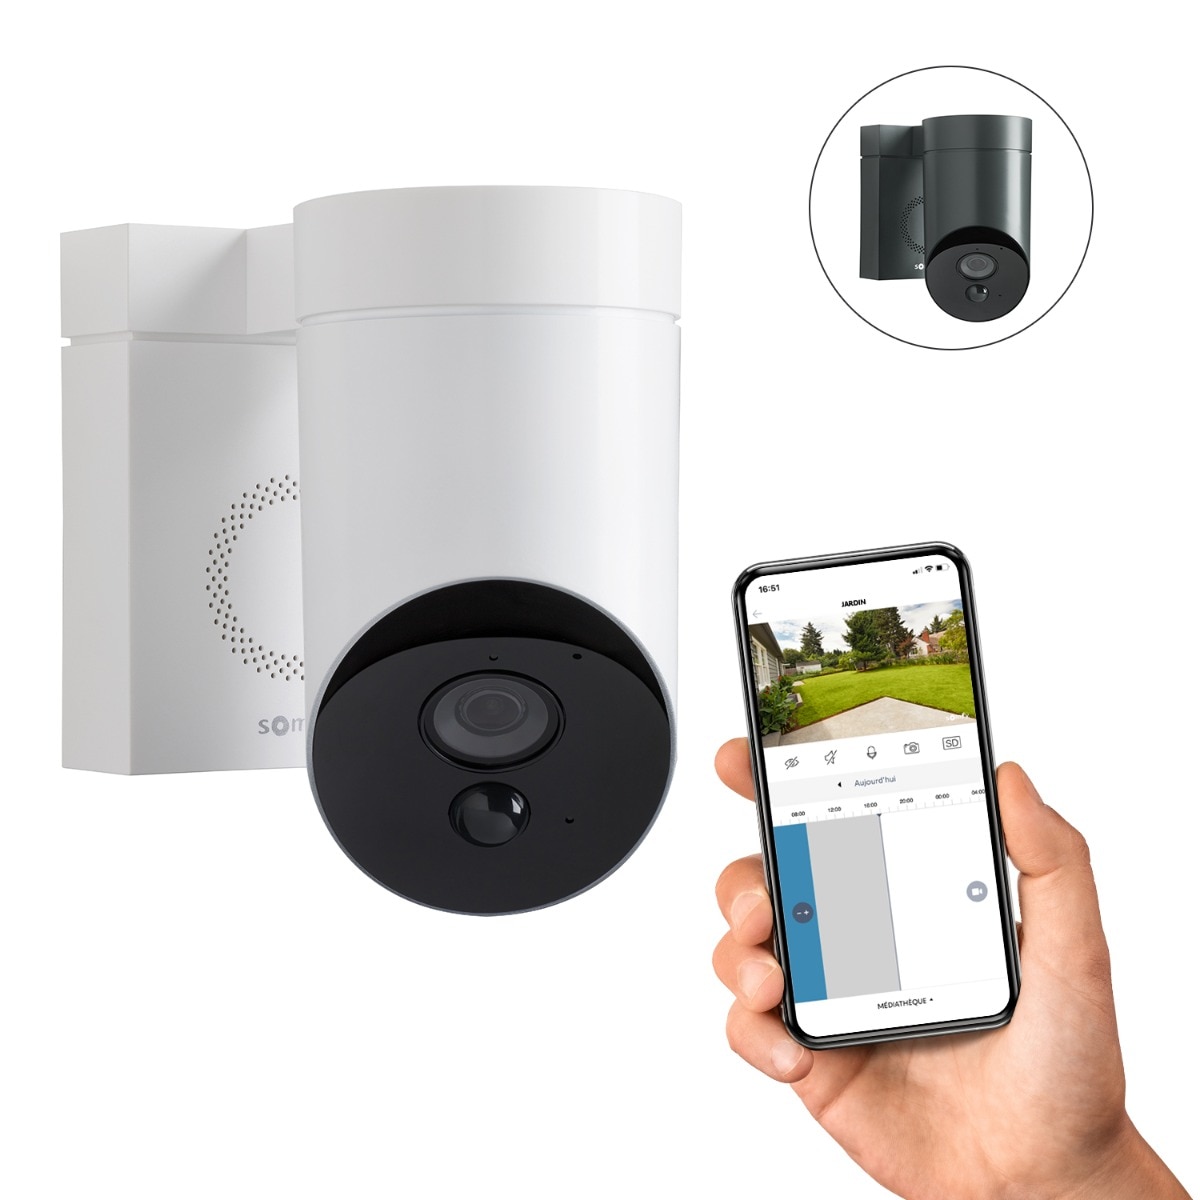 Somfy's Outdoor Camera tells you when it sees a person - CNET